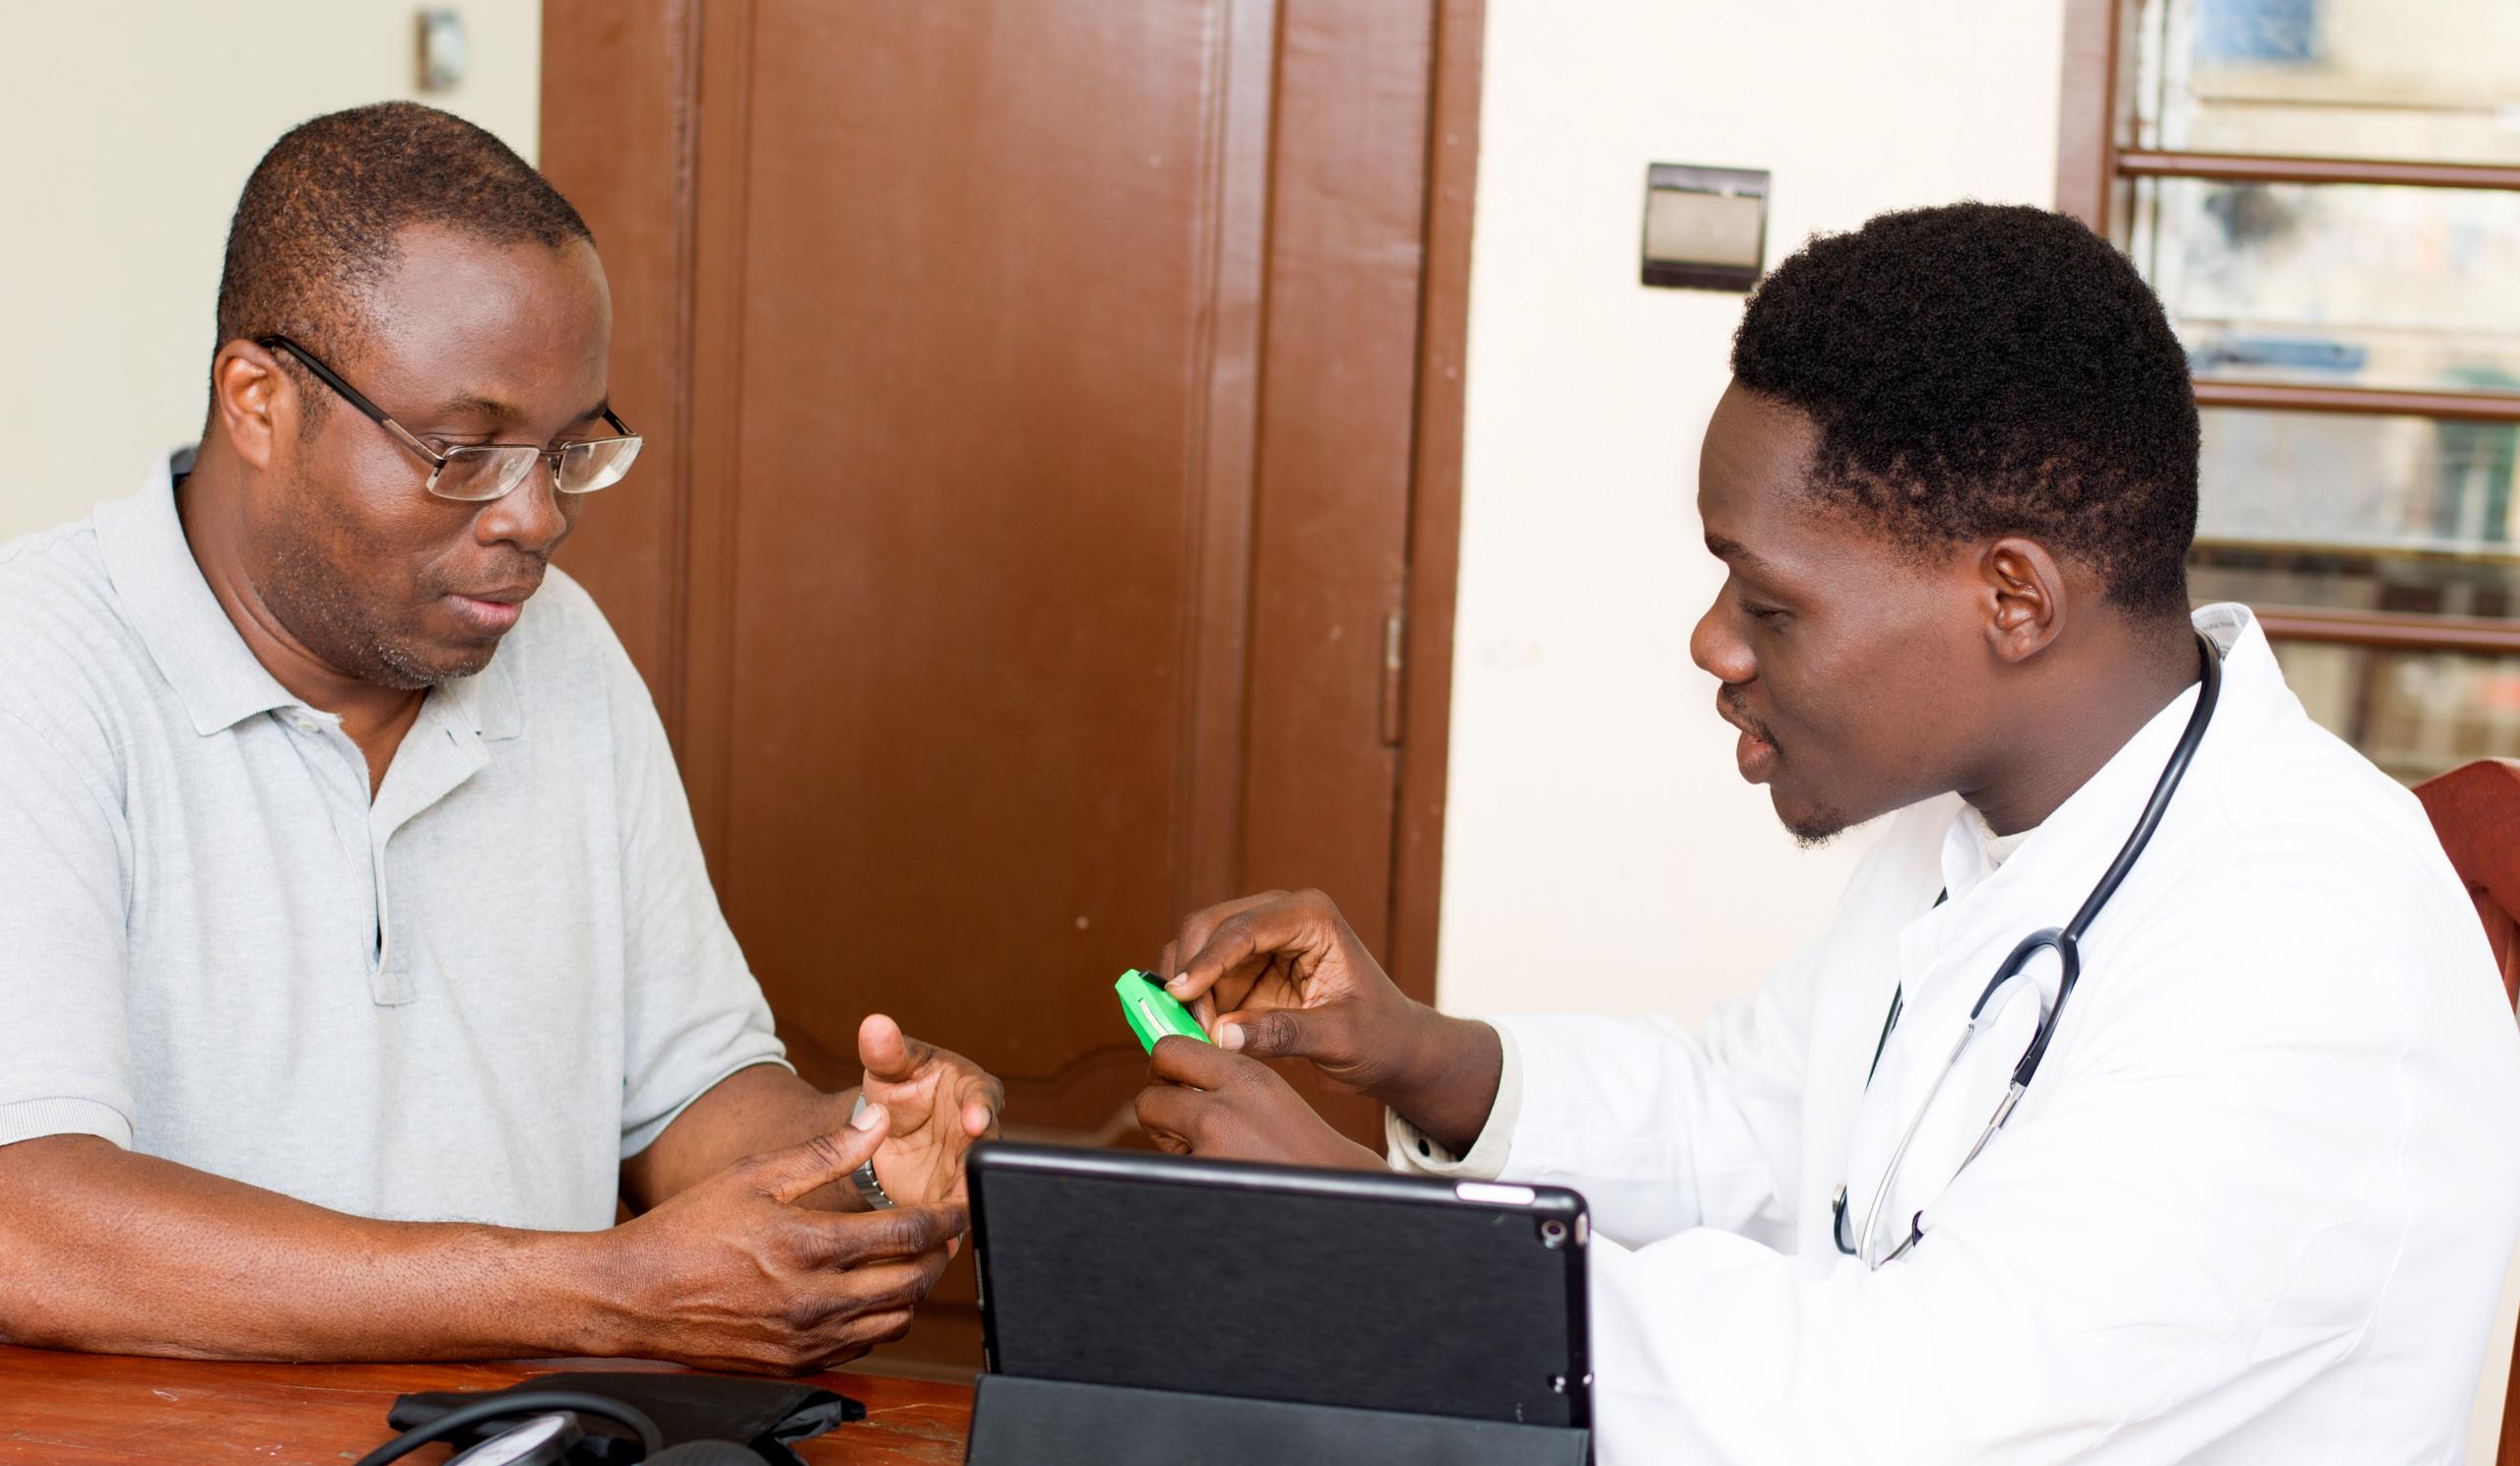 A doctor and patient using the electronic immunisation registry system